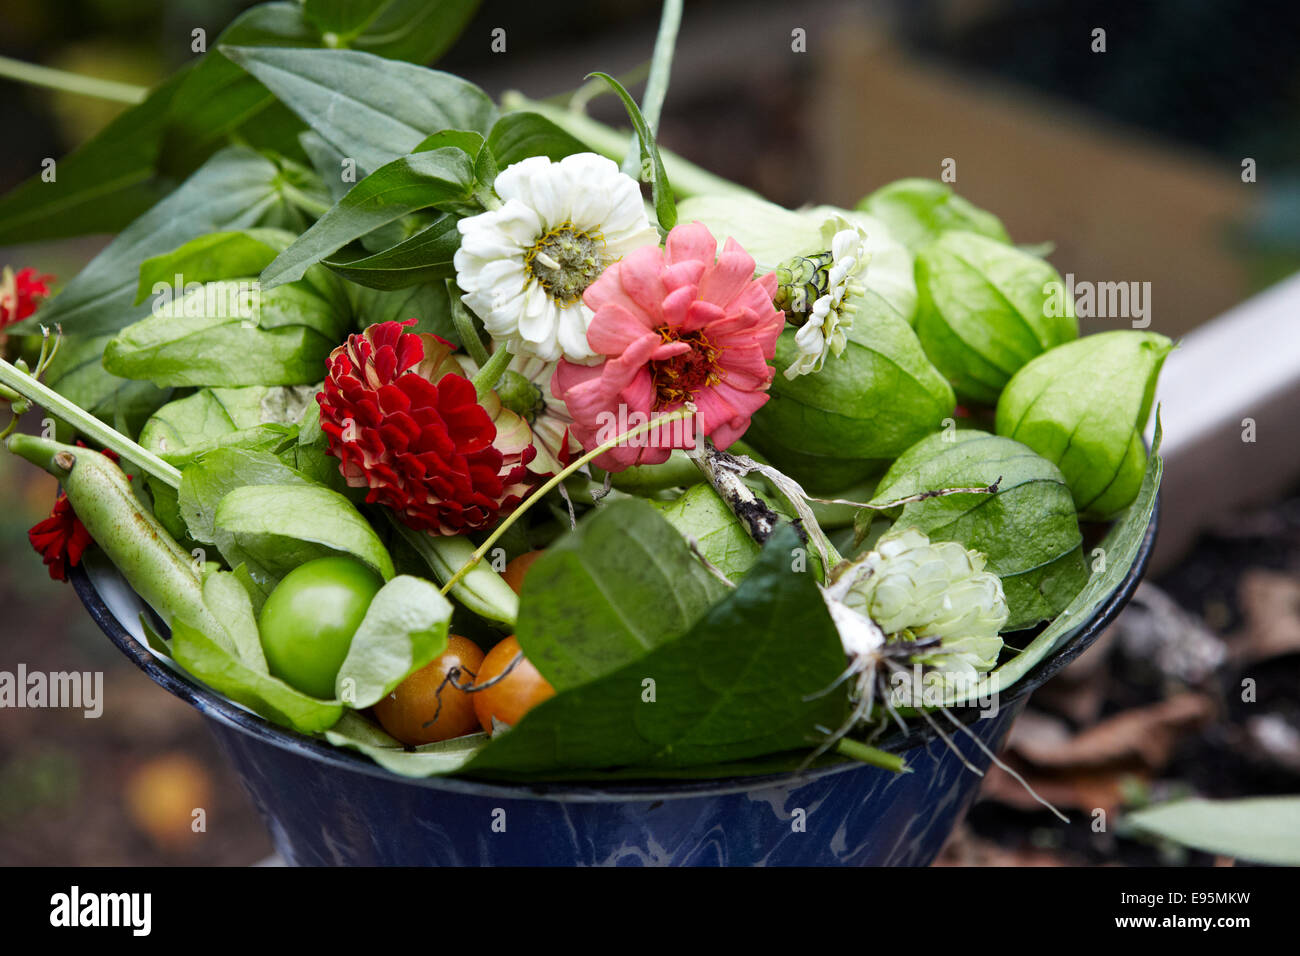 Bowl of vegetables and flowers harvested from home organic garden Stock Photo